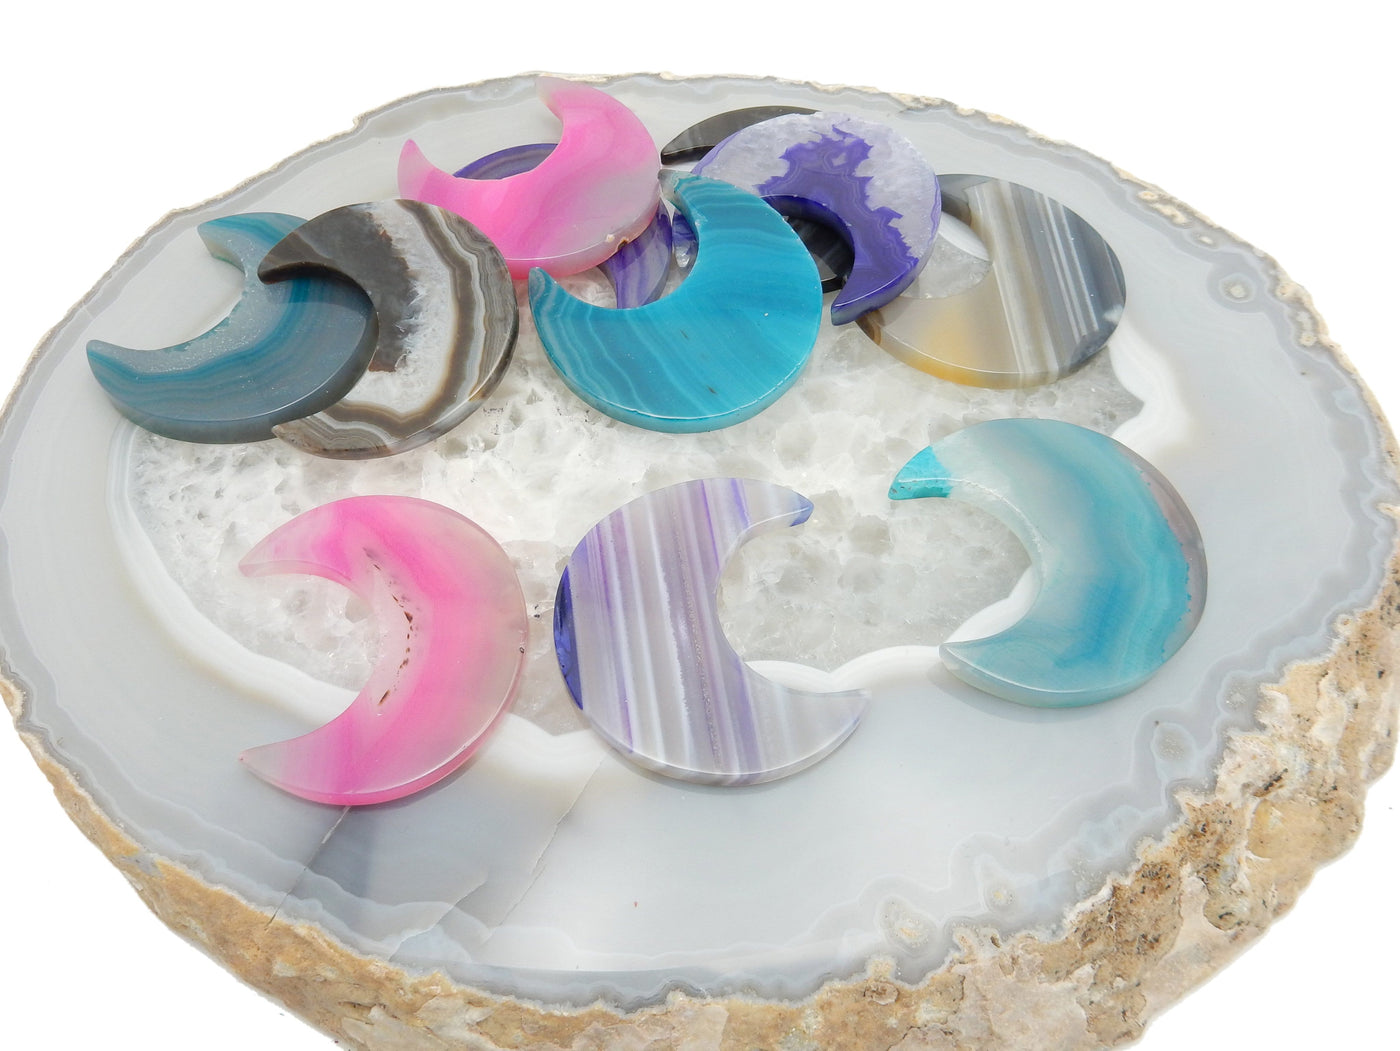 Some agate moons are being displayed on a crystal quartz platter.